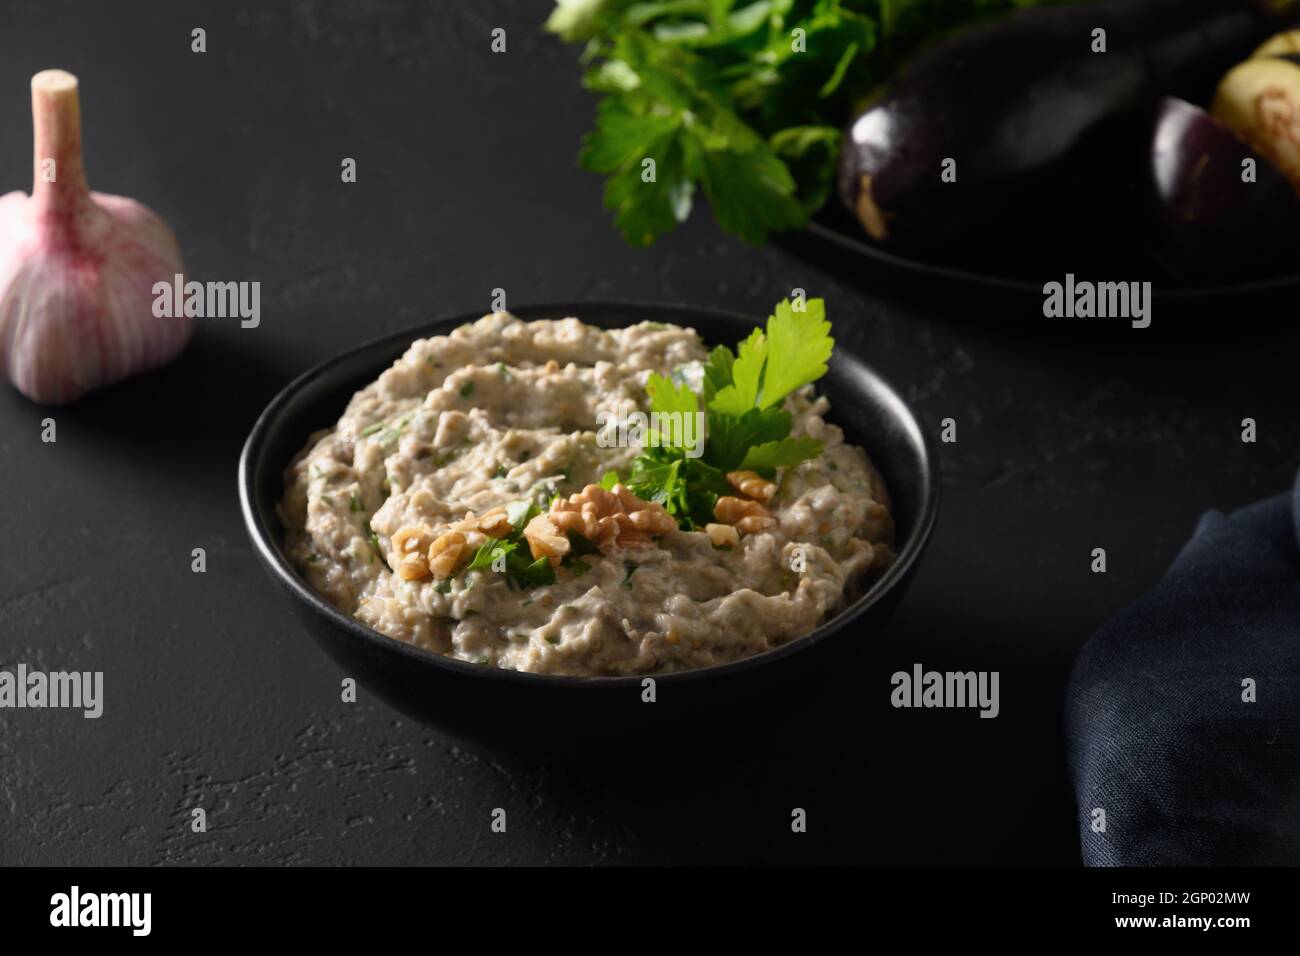 Baba ganoush Asian cuisine appetizer made from baked eggplant with parsley, garlic and olive oil on black table. Close up. Middle Eastern cuisine, veg Stock Photo